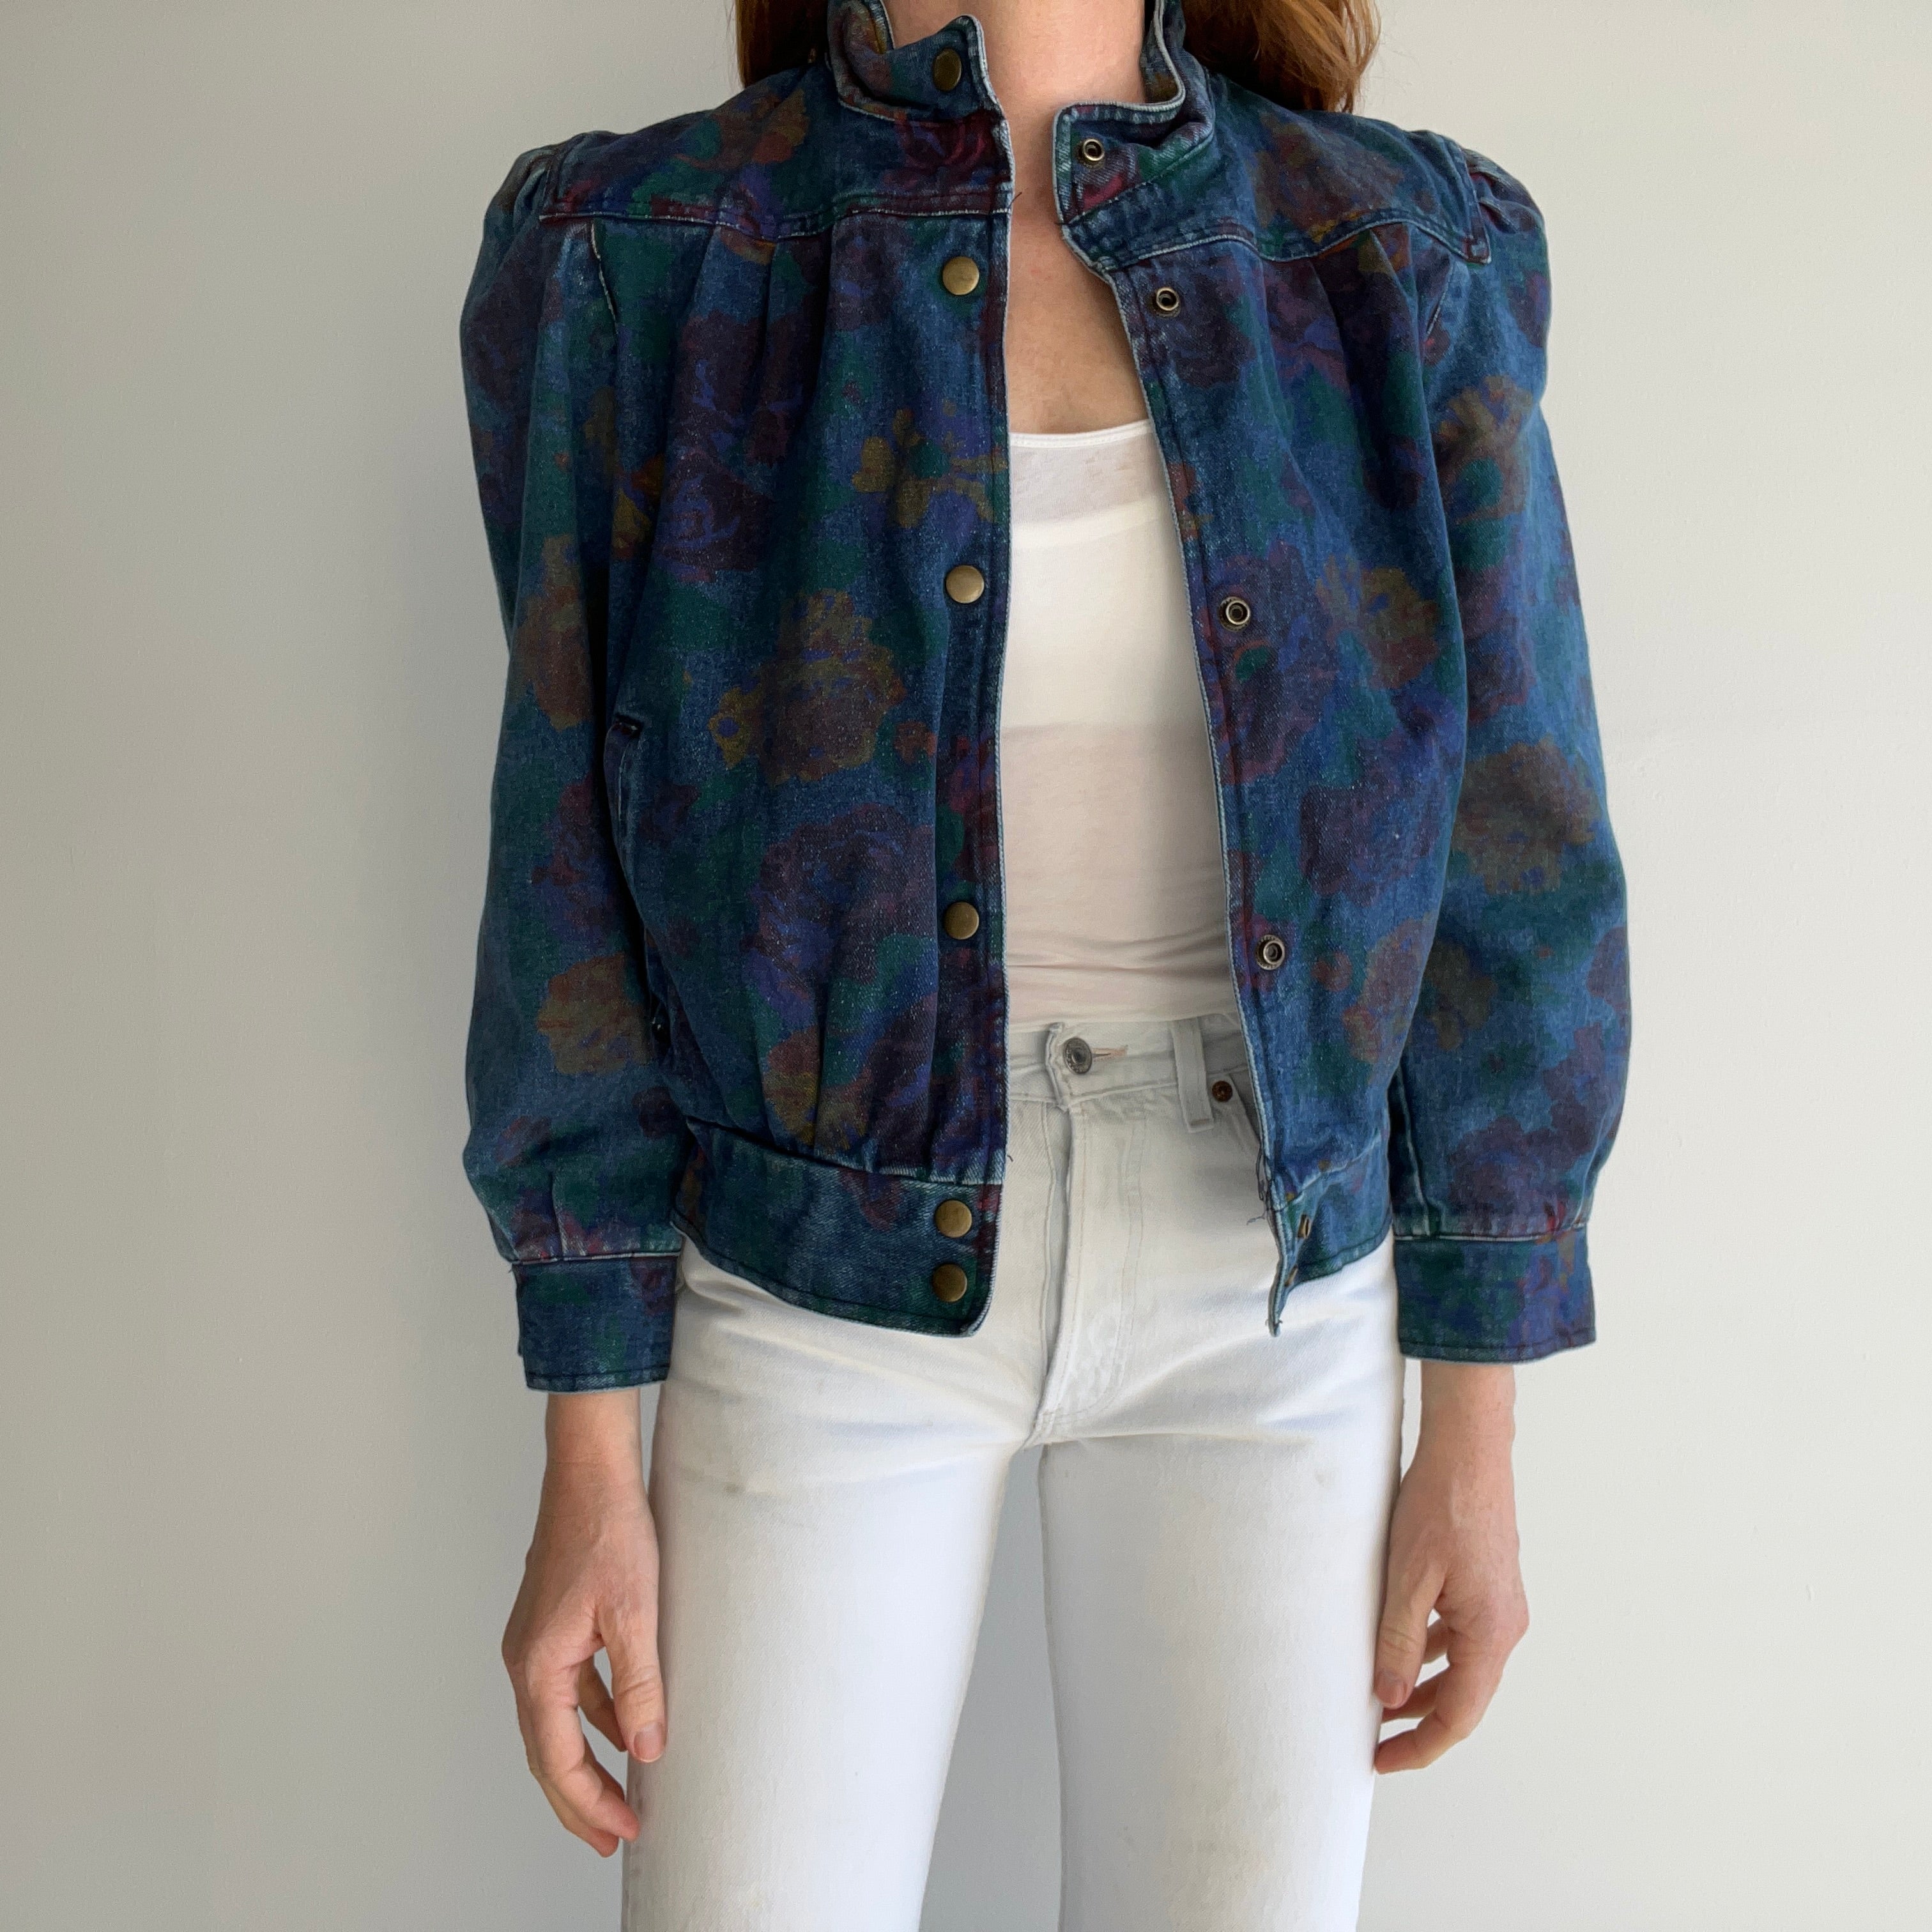 1980s Floral Puff Sleeves Babe of a Denim Jacket - !!!!!